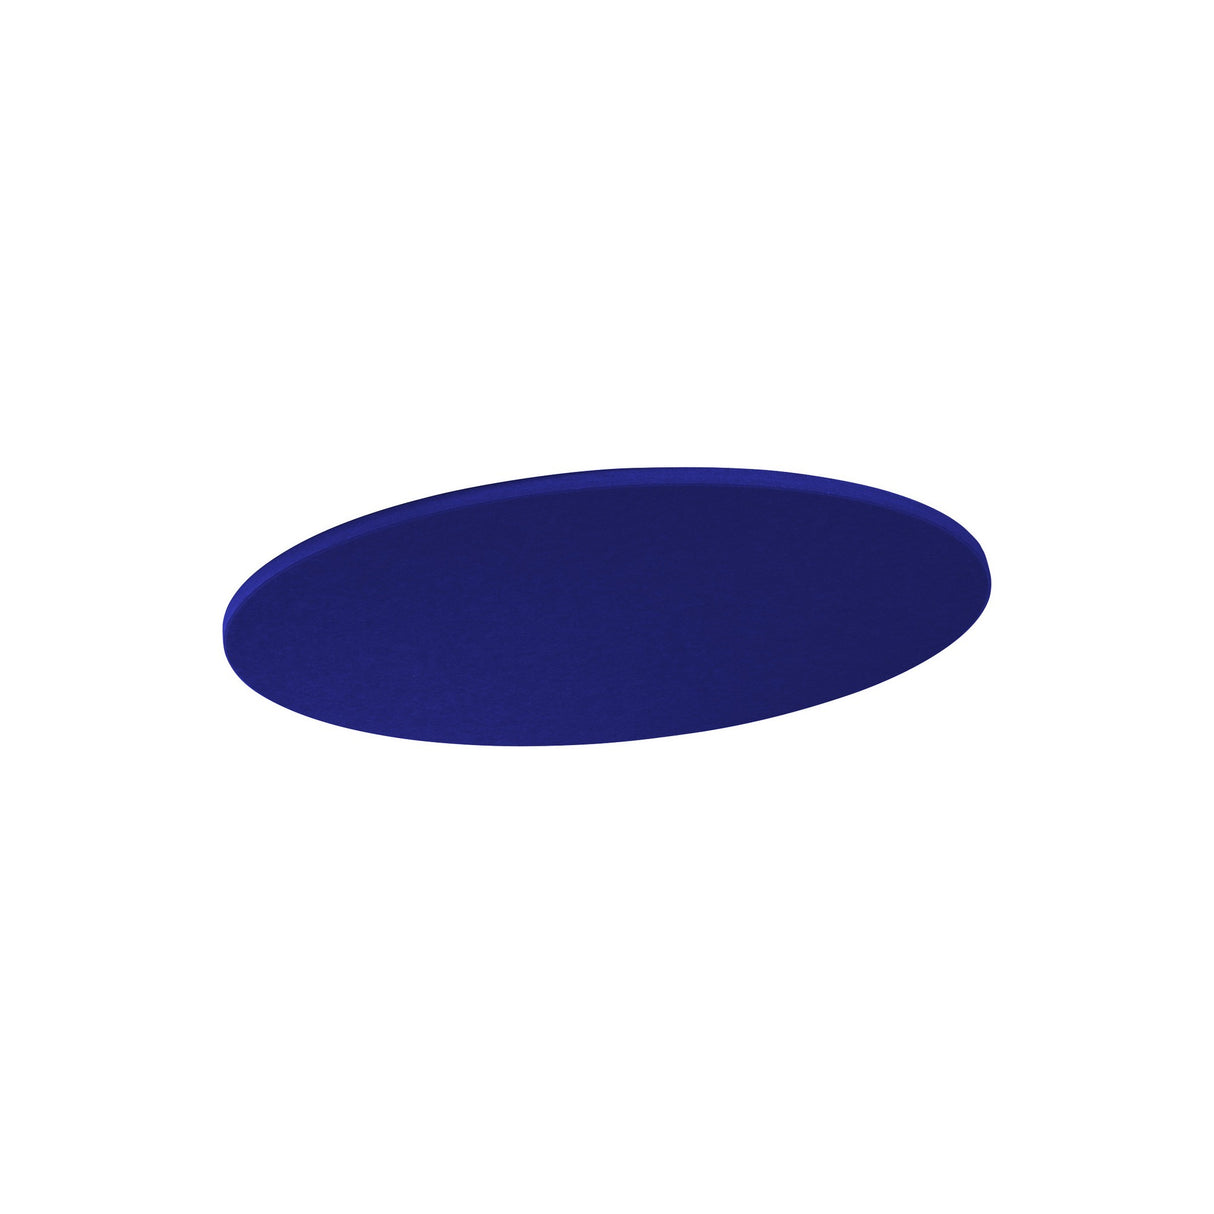 Primacoustic EcoScapes Round Cloud 33-Inch Micro-Beveled Edge Wall Panel, Cobalt 2-Pack